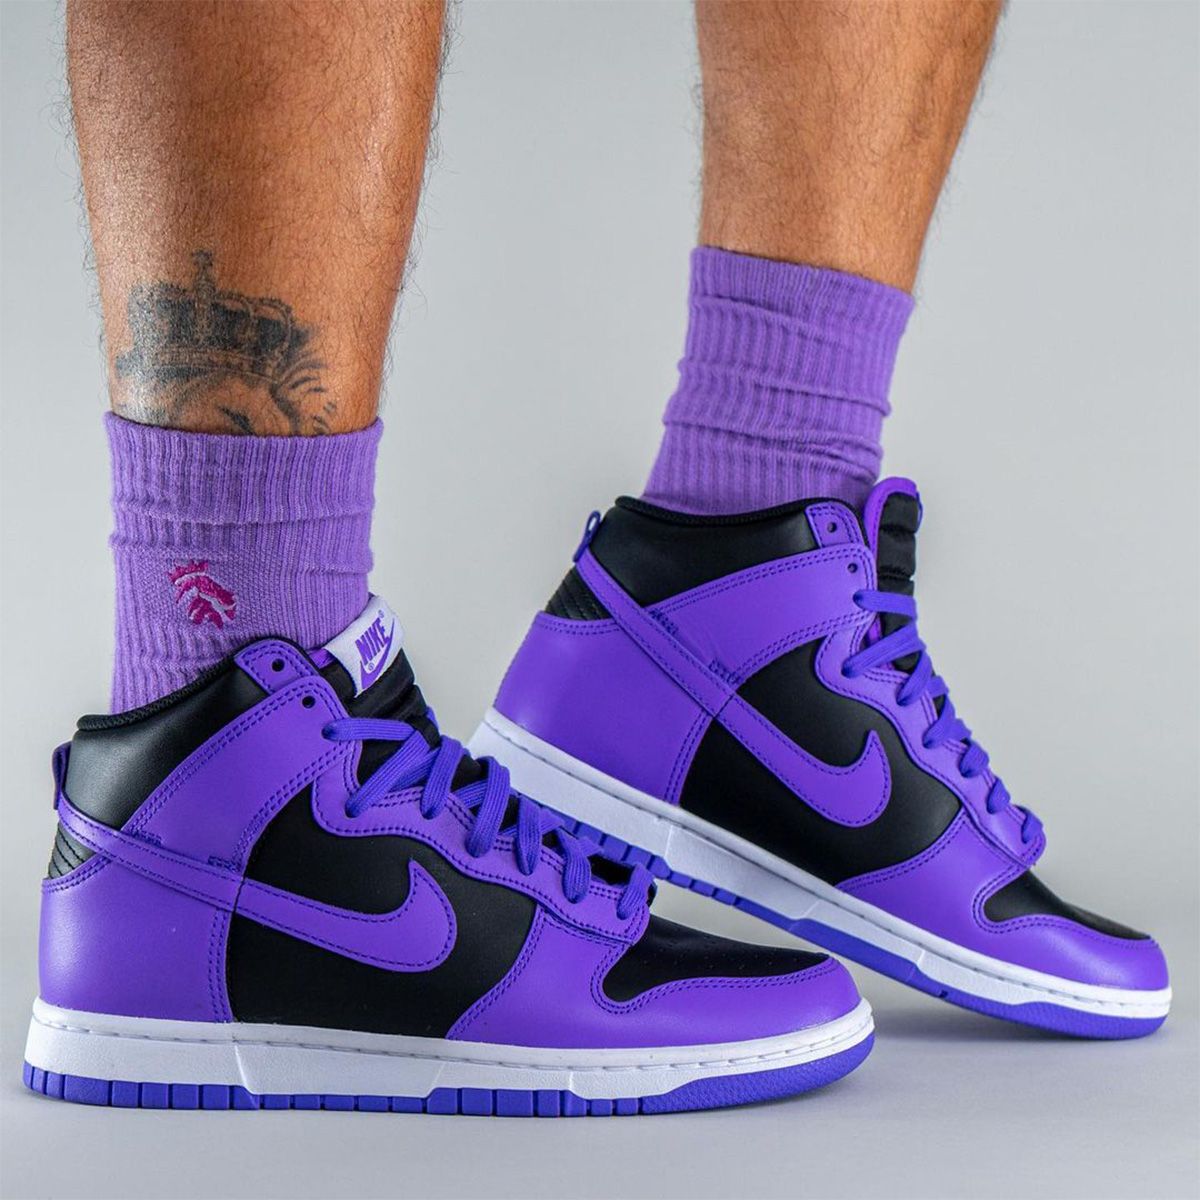 Where to Buy the Nike Dunk High “Psychic Purple” | House of Heat°